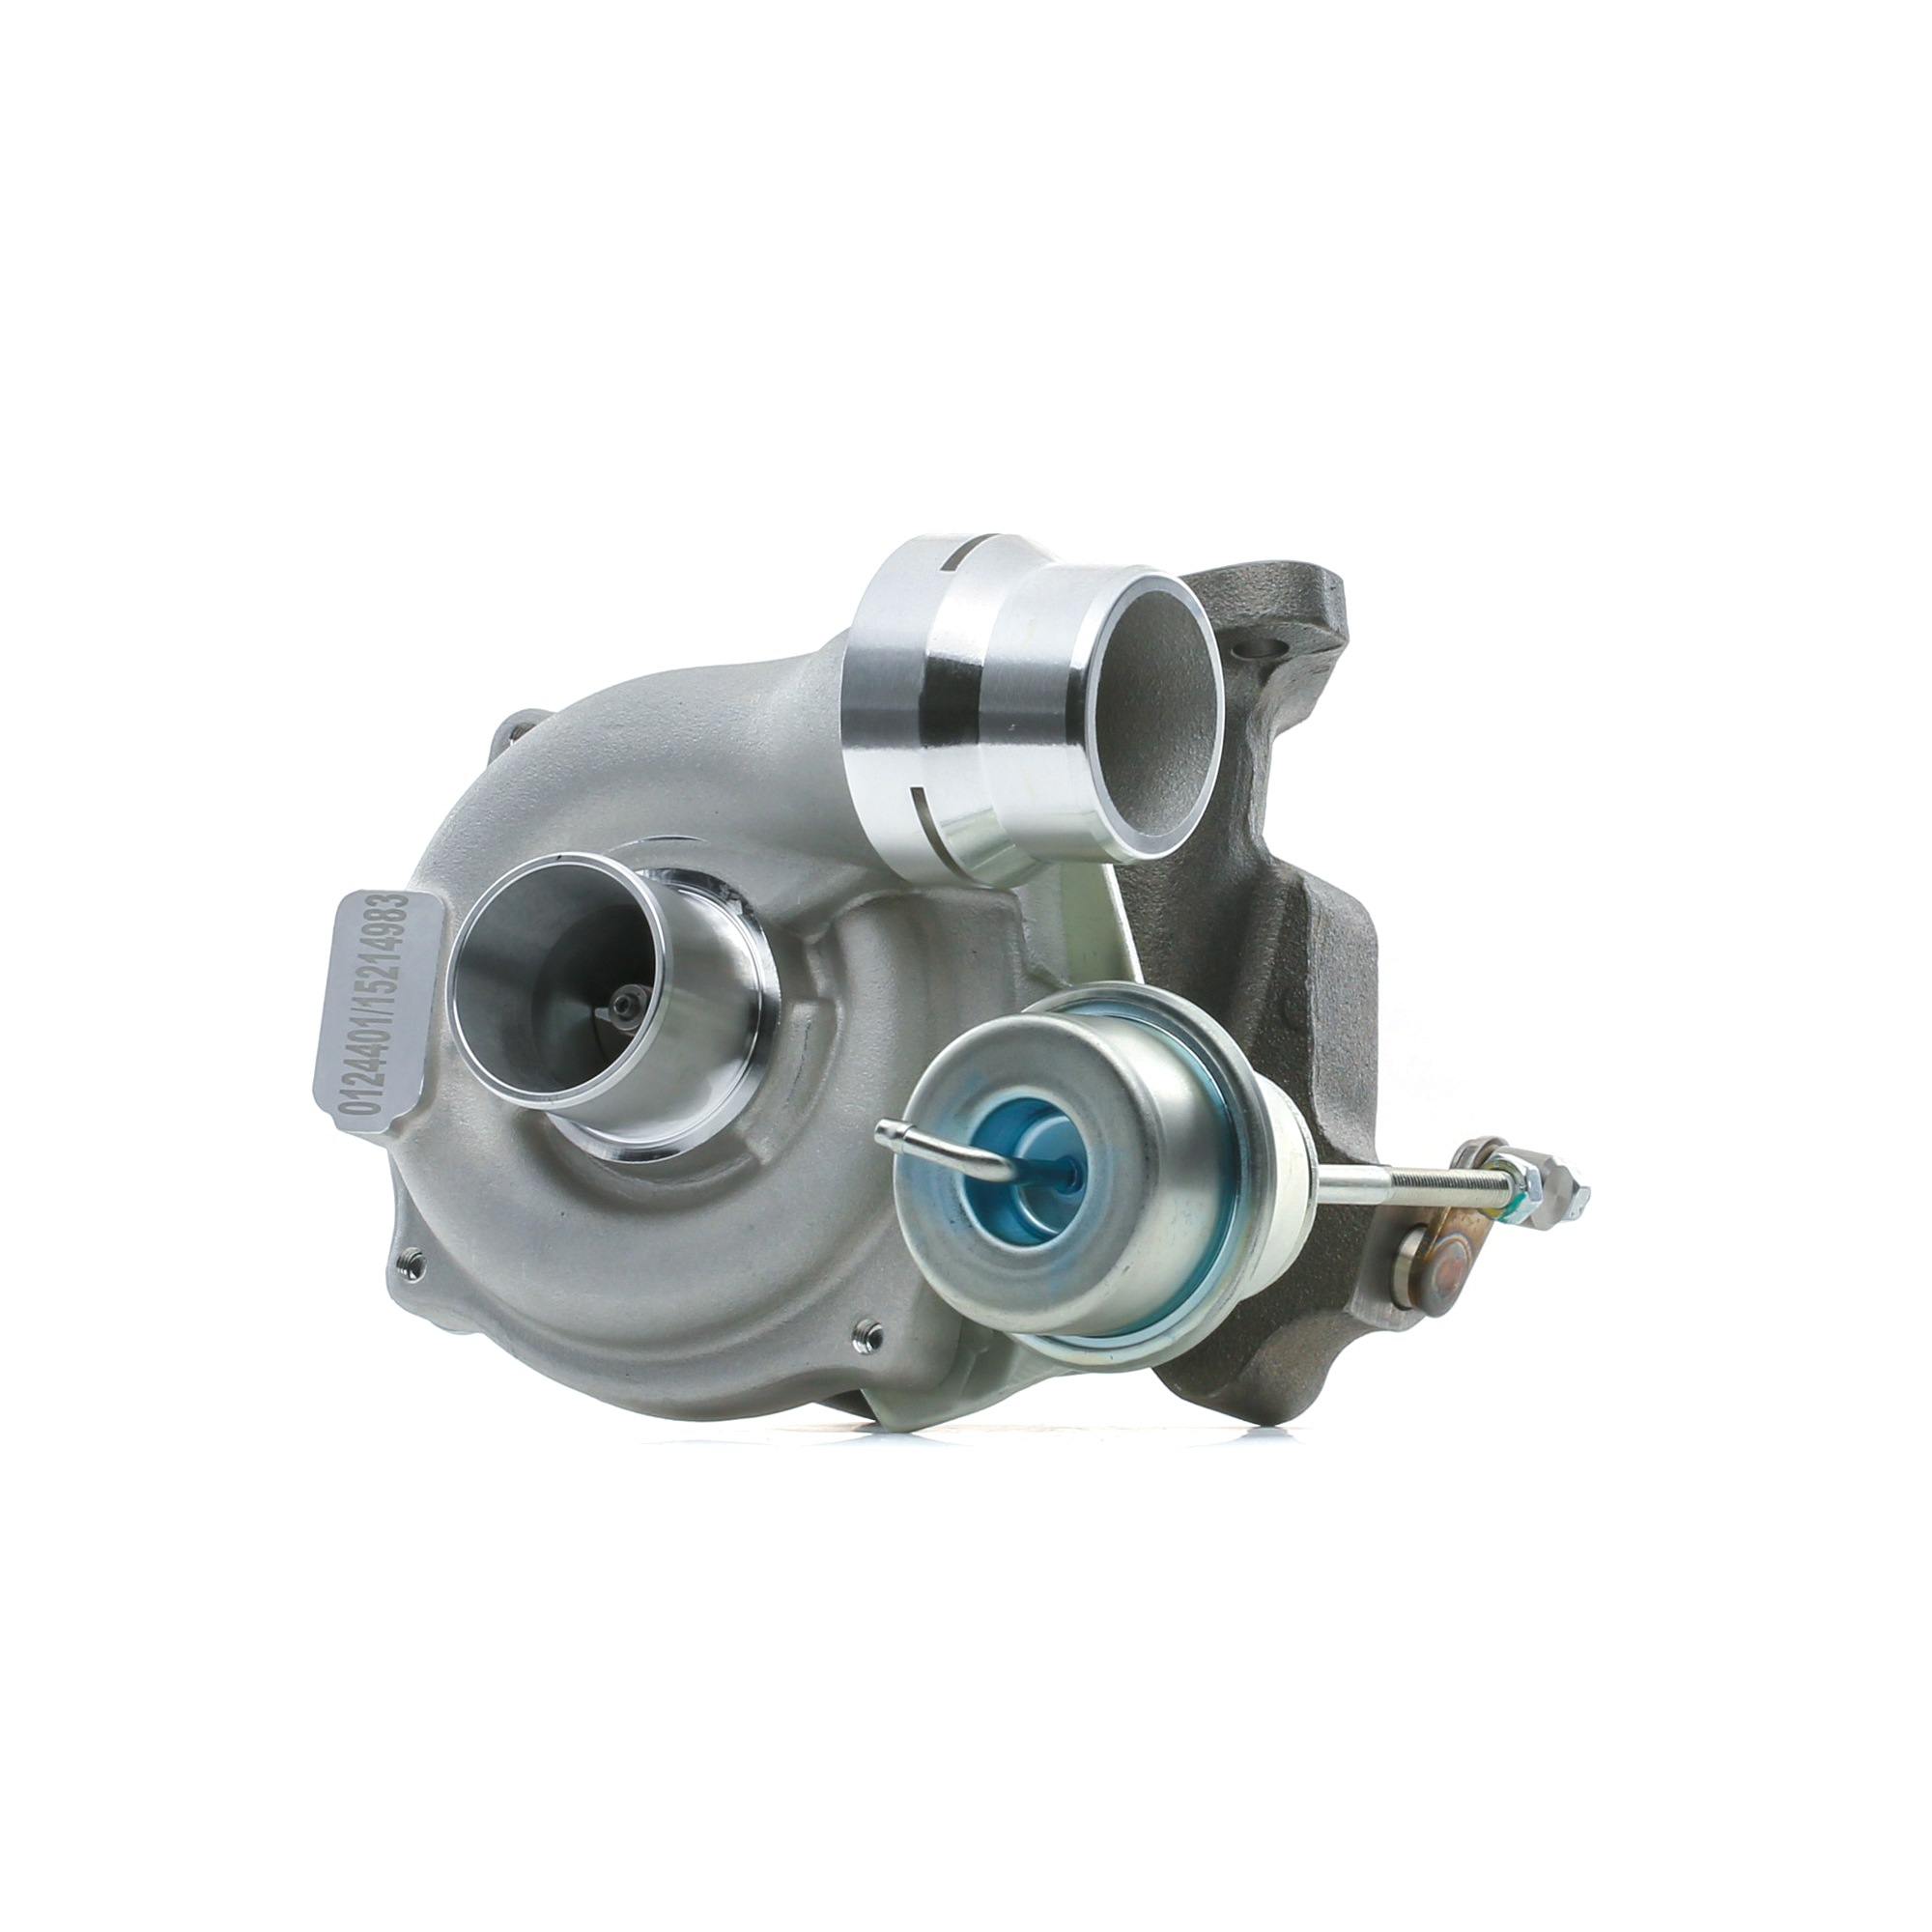 SKCT-1190271 STARK Turbocharger DACIA Exhaust Turbocharger, Pneumatic, with gaskets/seals